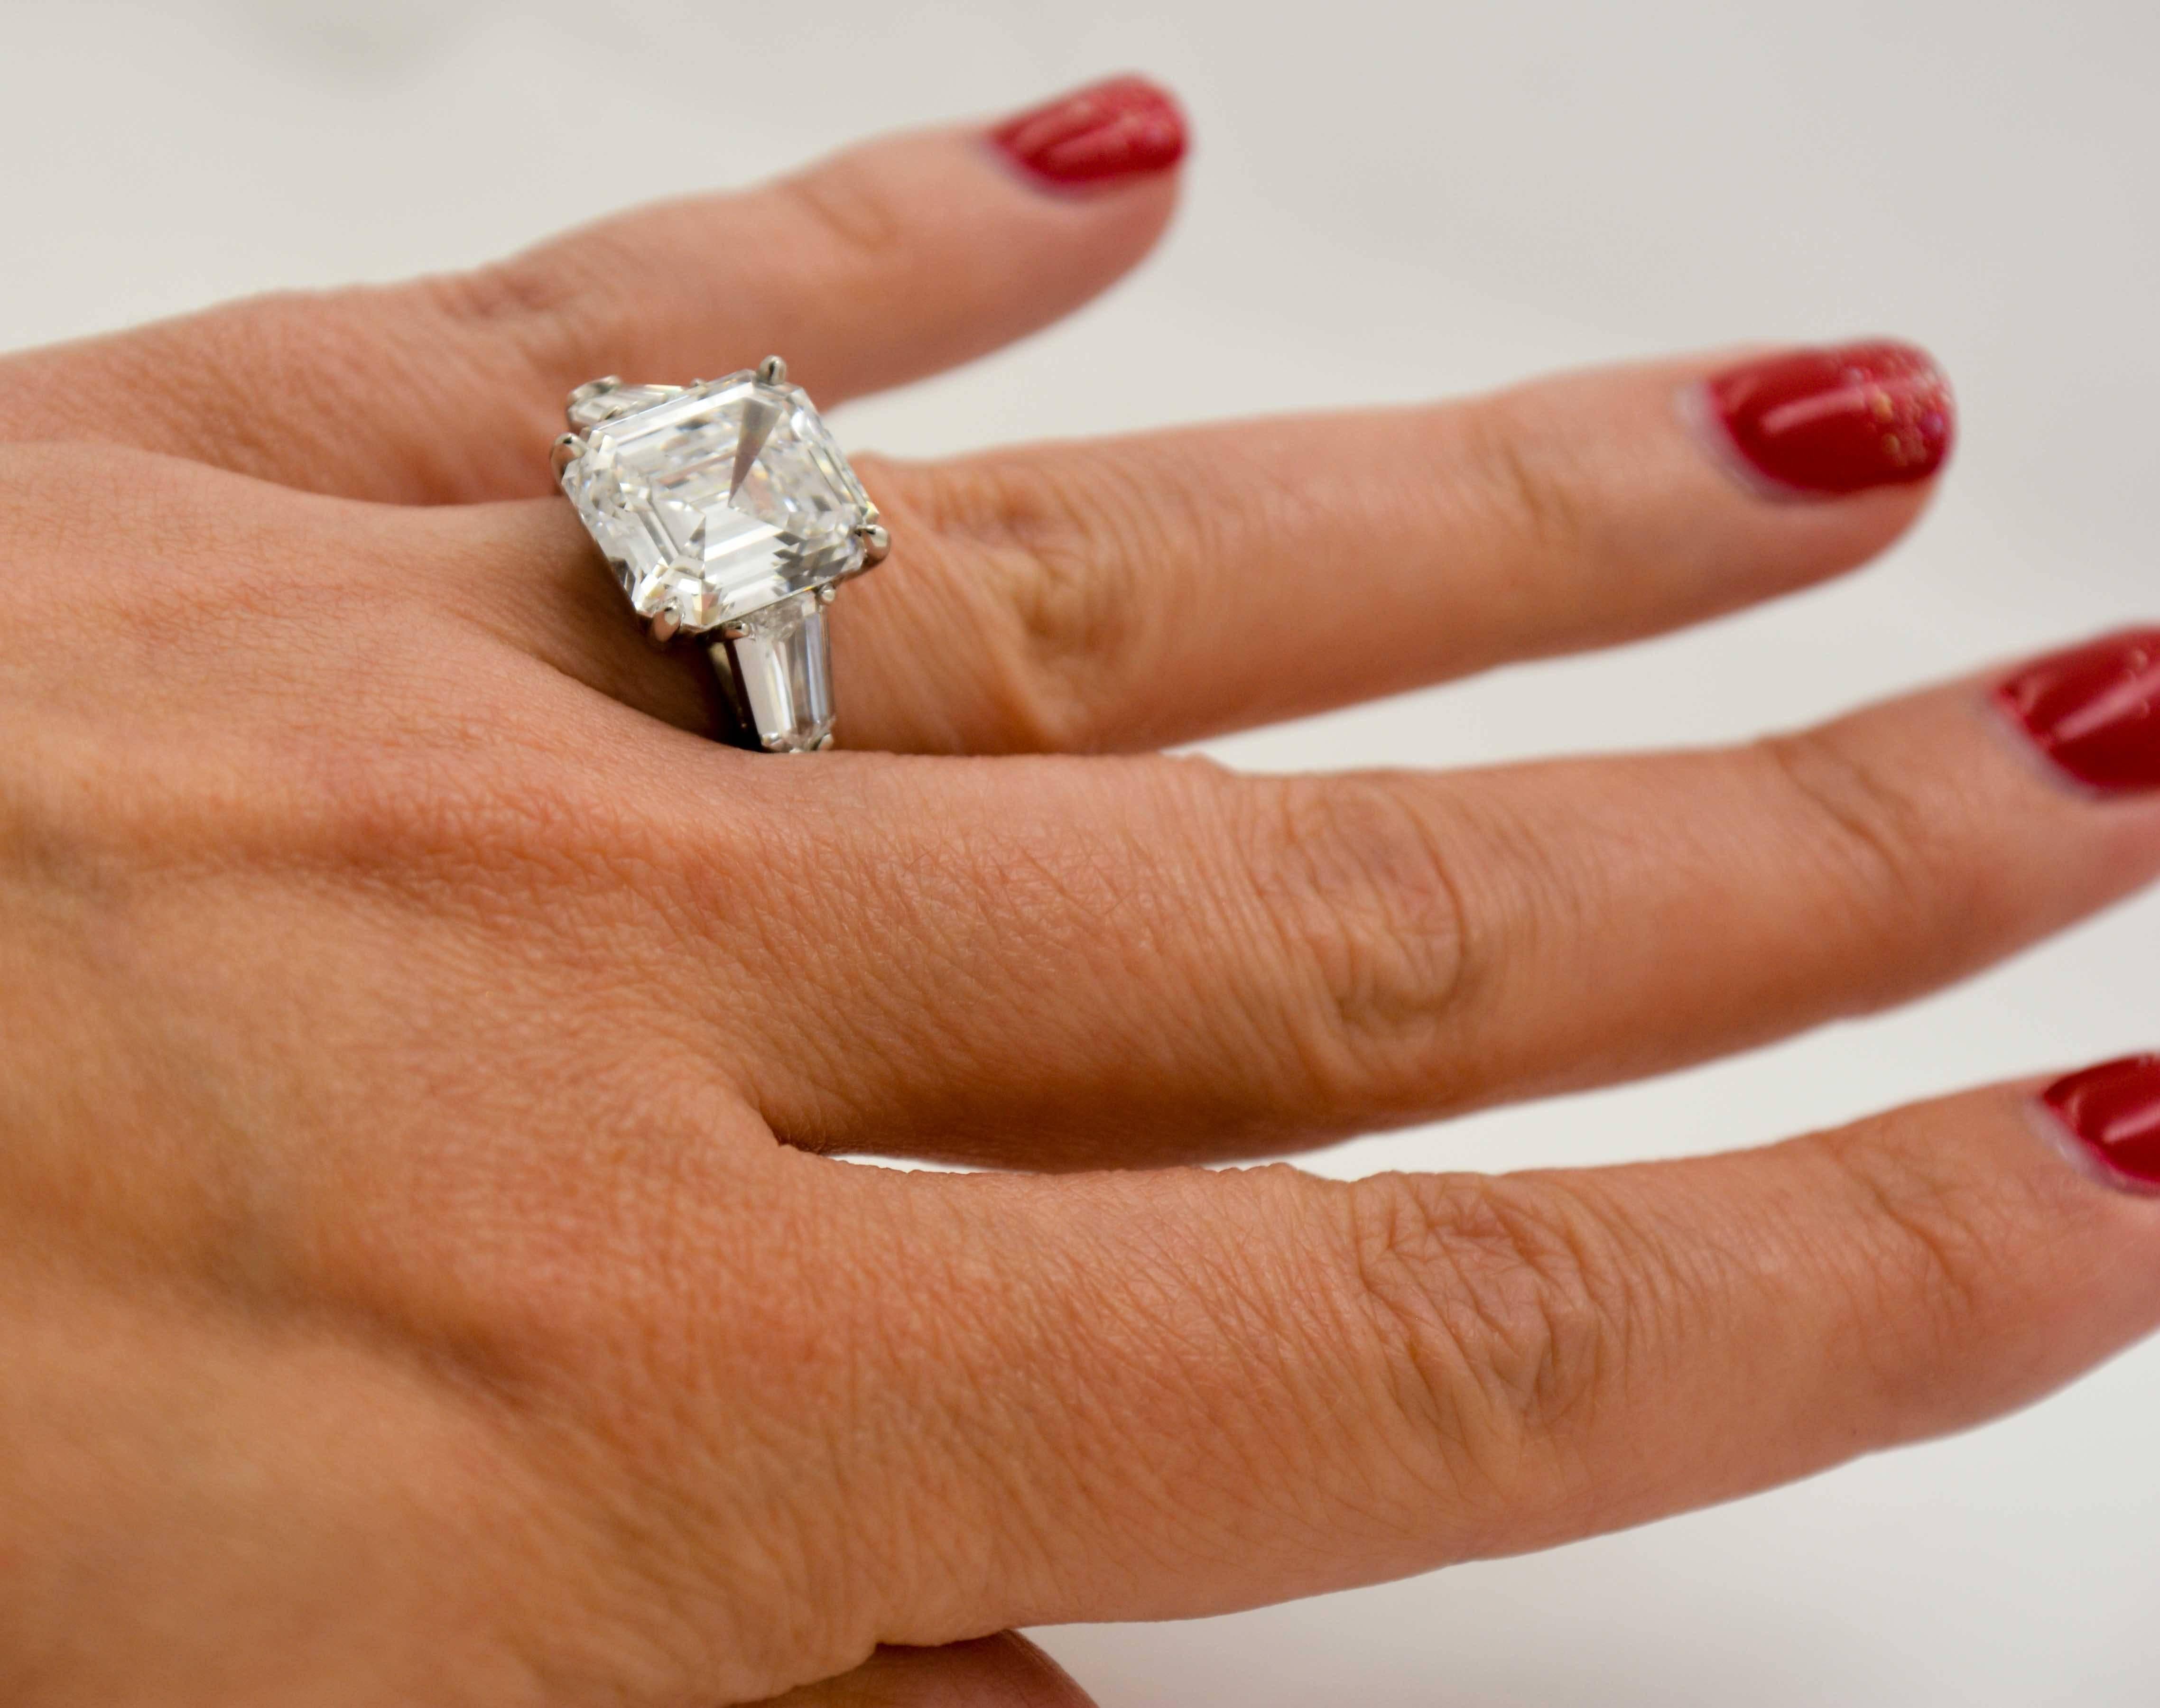 Supremely elegant, this awe-inspiring diamond engagement ring will show off your style. The center stone is an incredible 8.02 carat emerald cut diamond with an unbelievable D color and clarity of VS2 (The diamond comes with a report from the